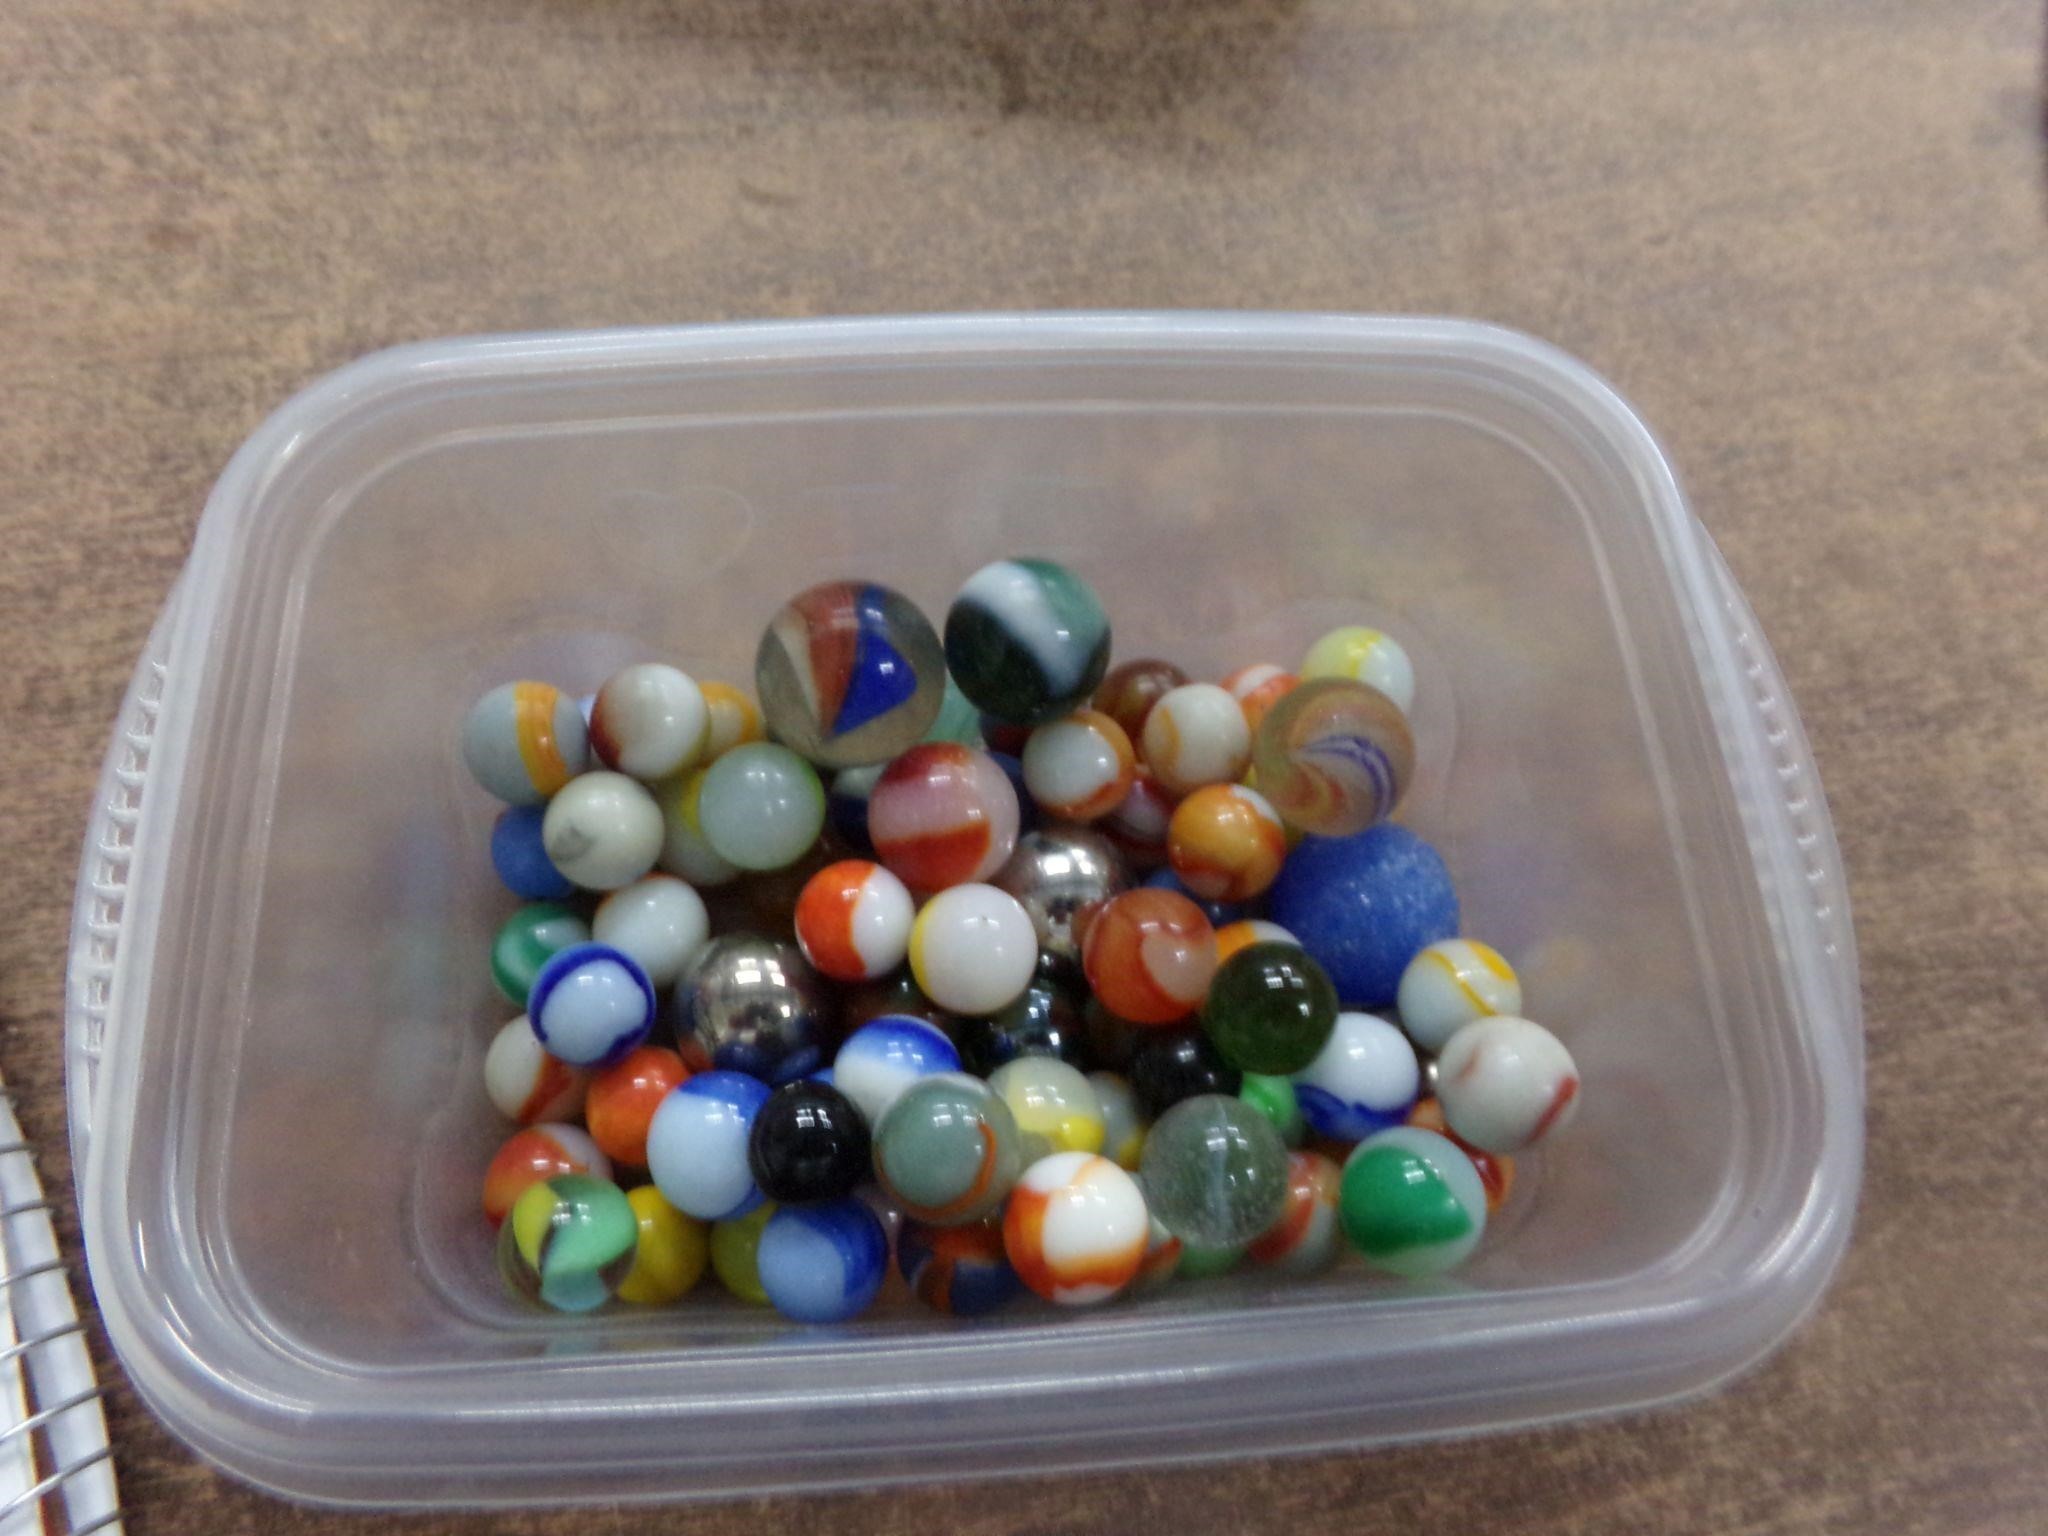 75 old marbles